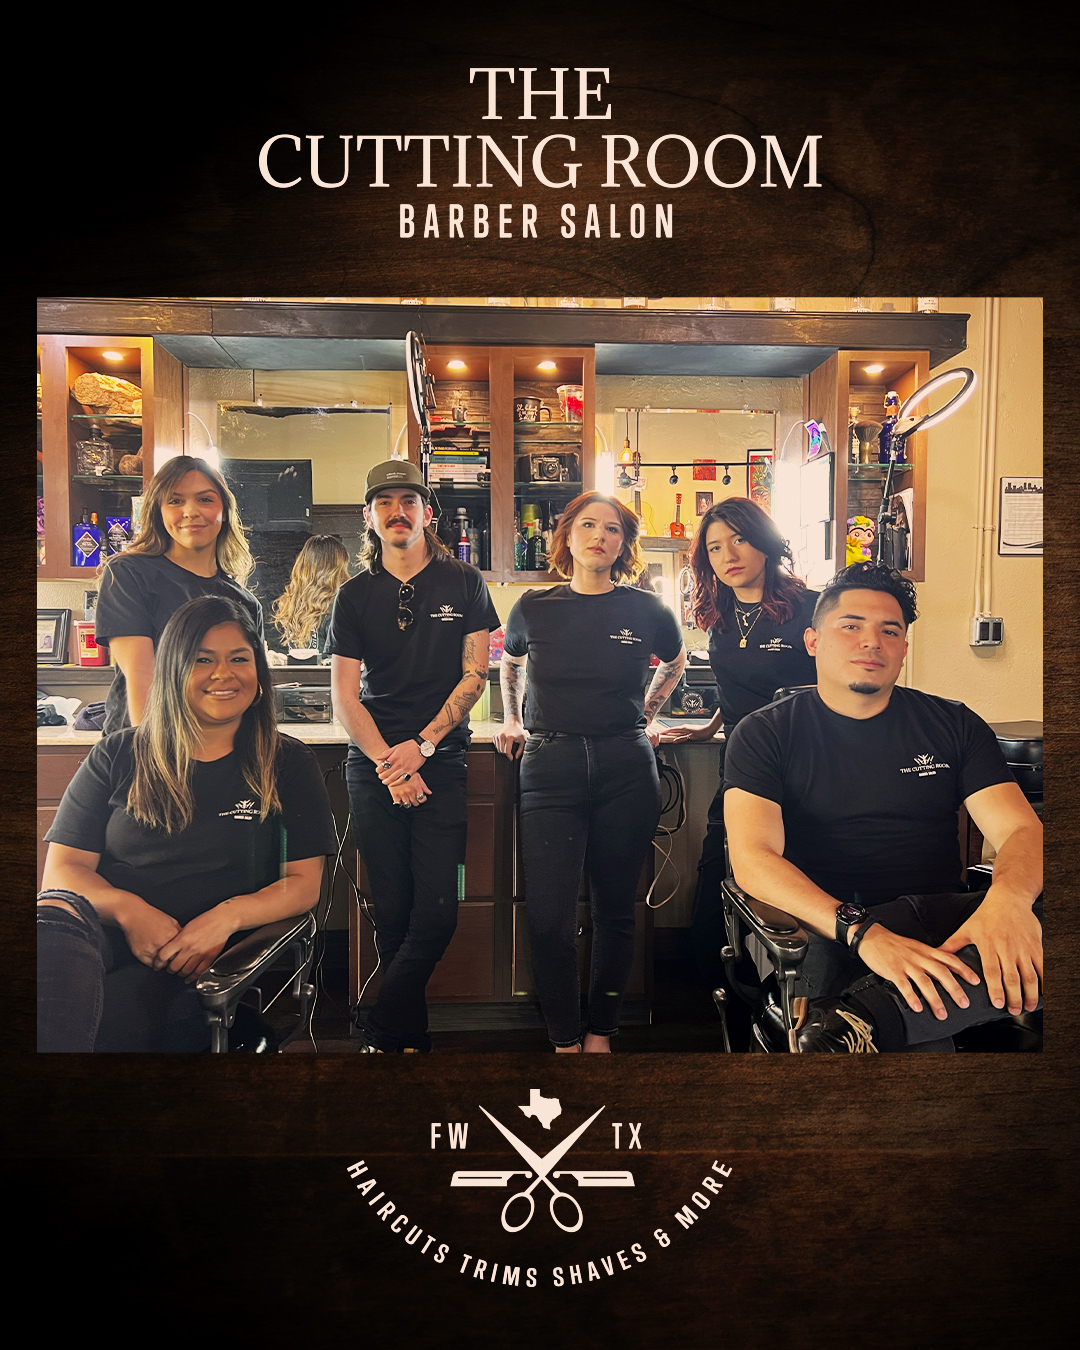 Six stylists pose for a picture. The image is on a dark wood grain background with a simplified version of the logo below it. This logo features only two razor blades and the location – Ft. Worth, Texas.